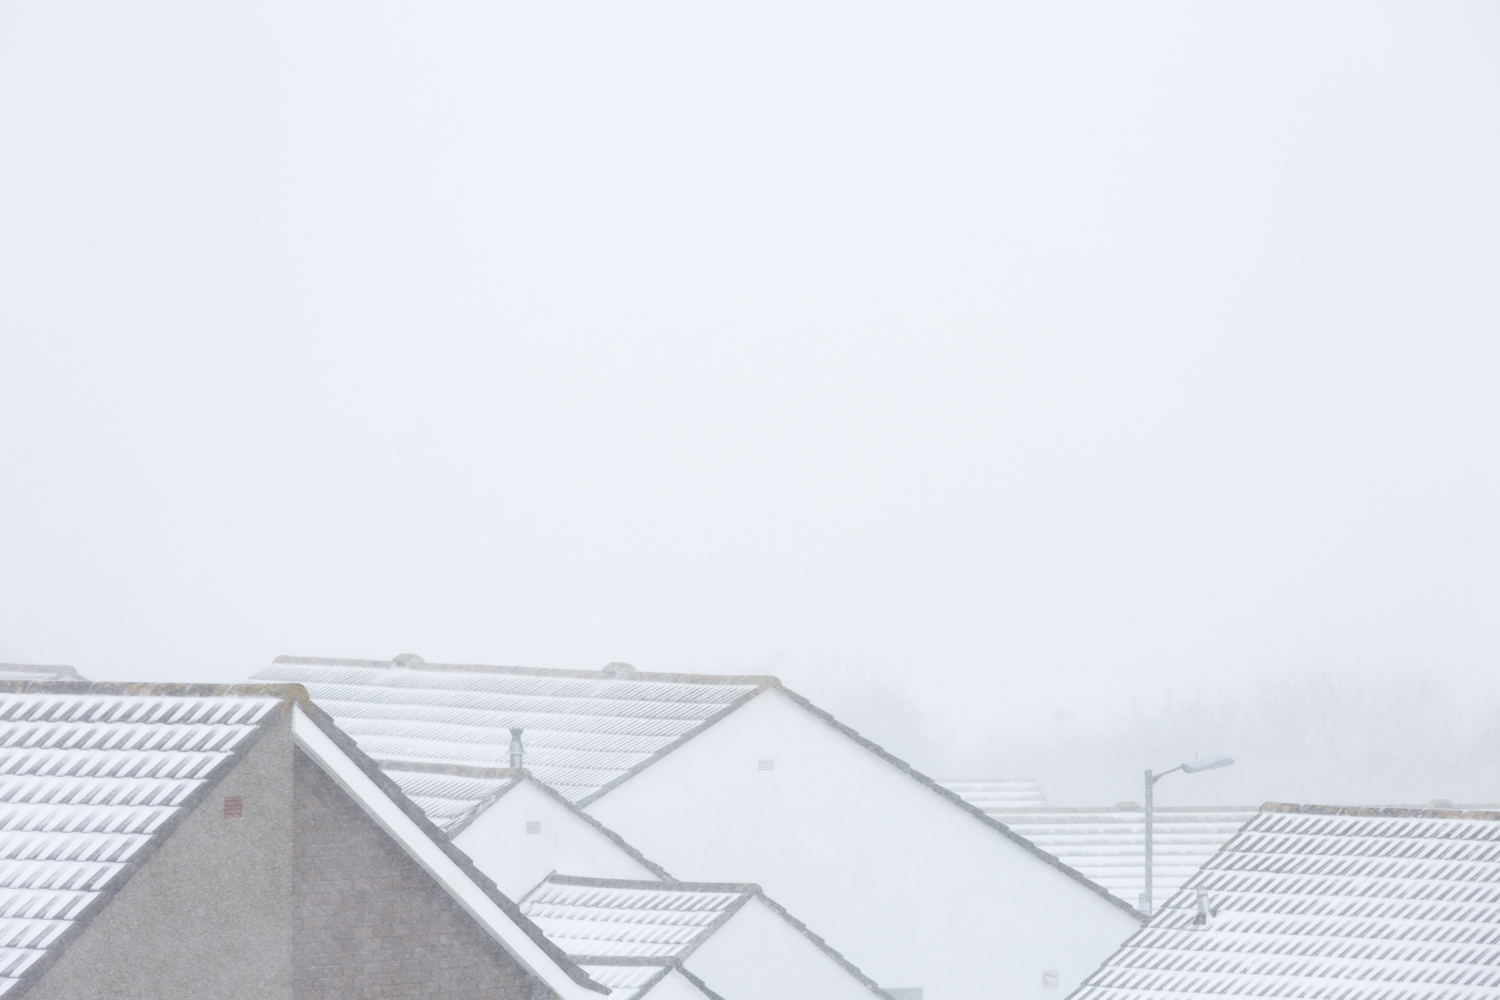 When the beast from the east hit I was at home with both kids.  This shot was taken out of my bedroom window.  Normally this view would extend for miles with a distant St. Ives, but the fierce nature of the snow heavily reduced visibility.  I liked the shapes of houses and repeating pattern.